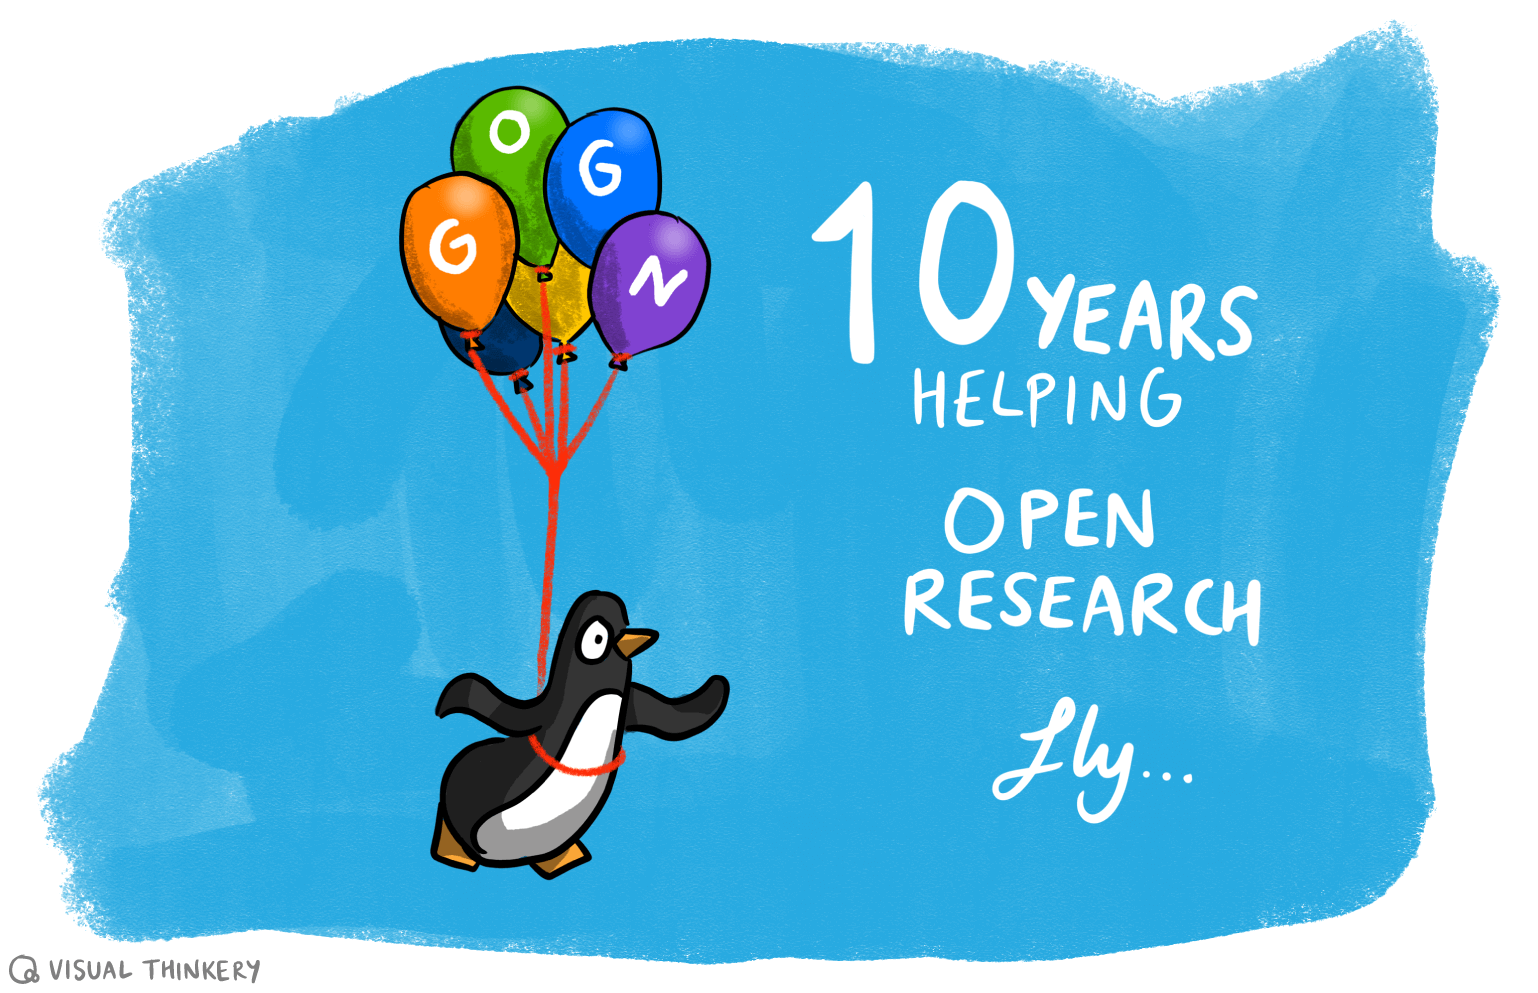 Helping Open Research fly - GO-GN